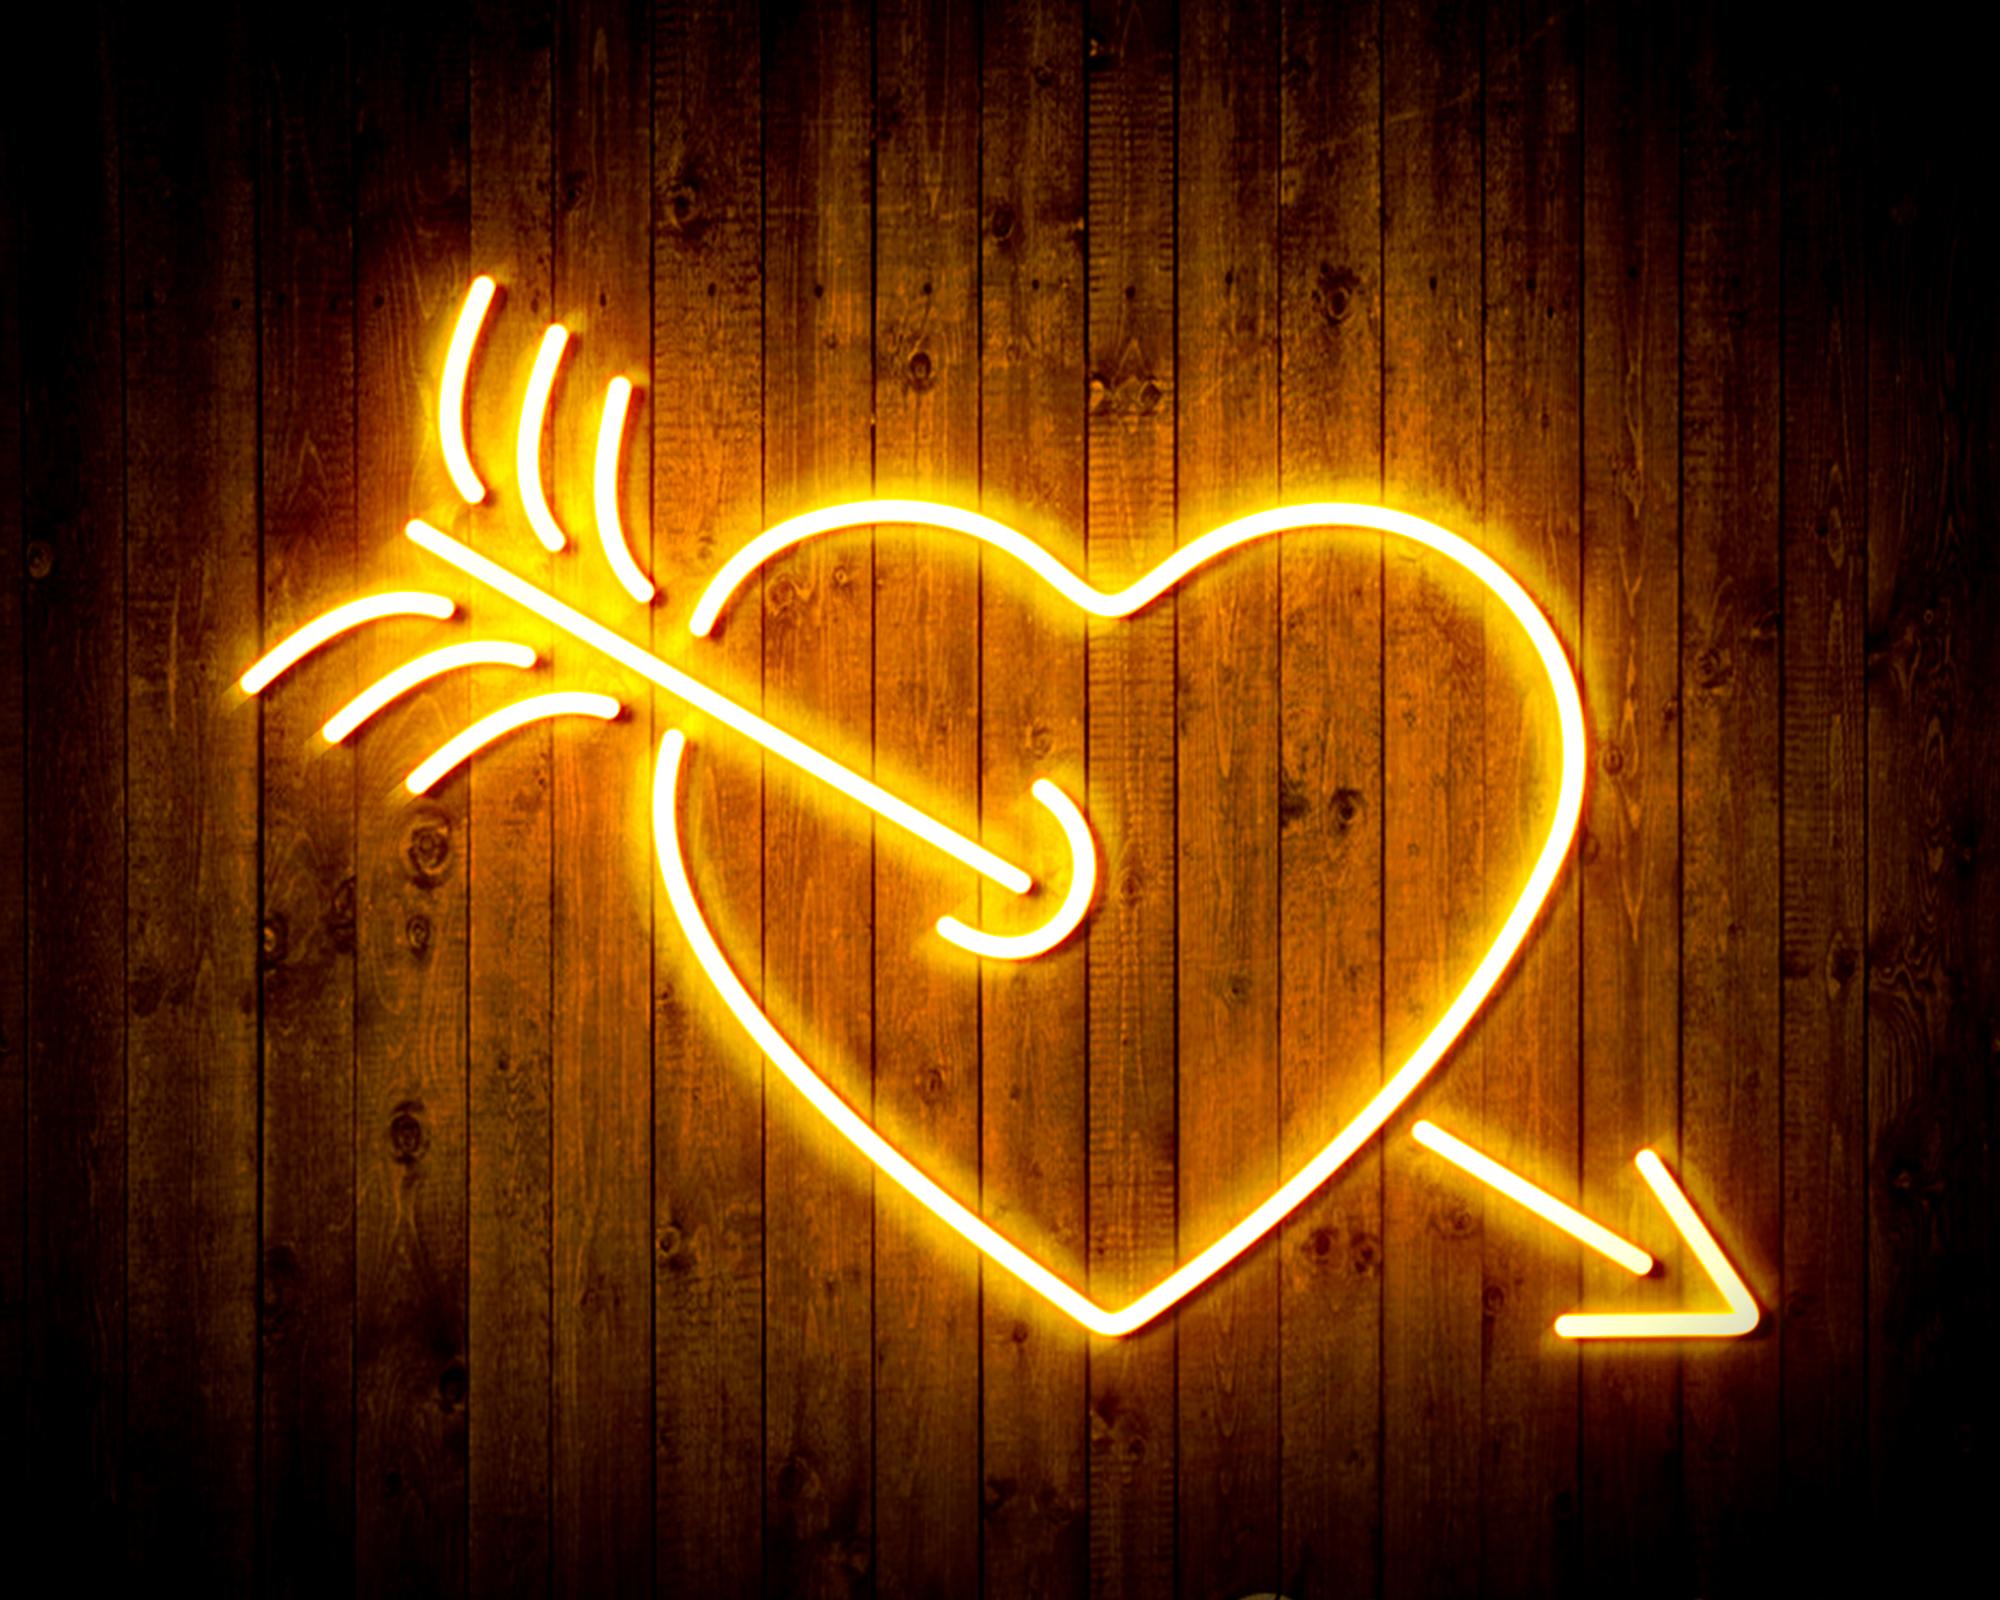 Heart and Arrow LED Neon Sign